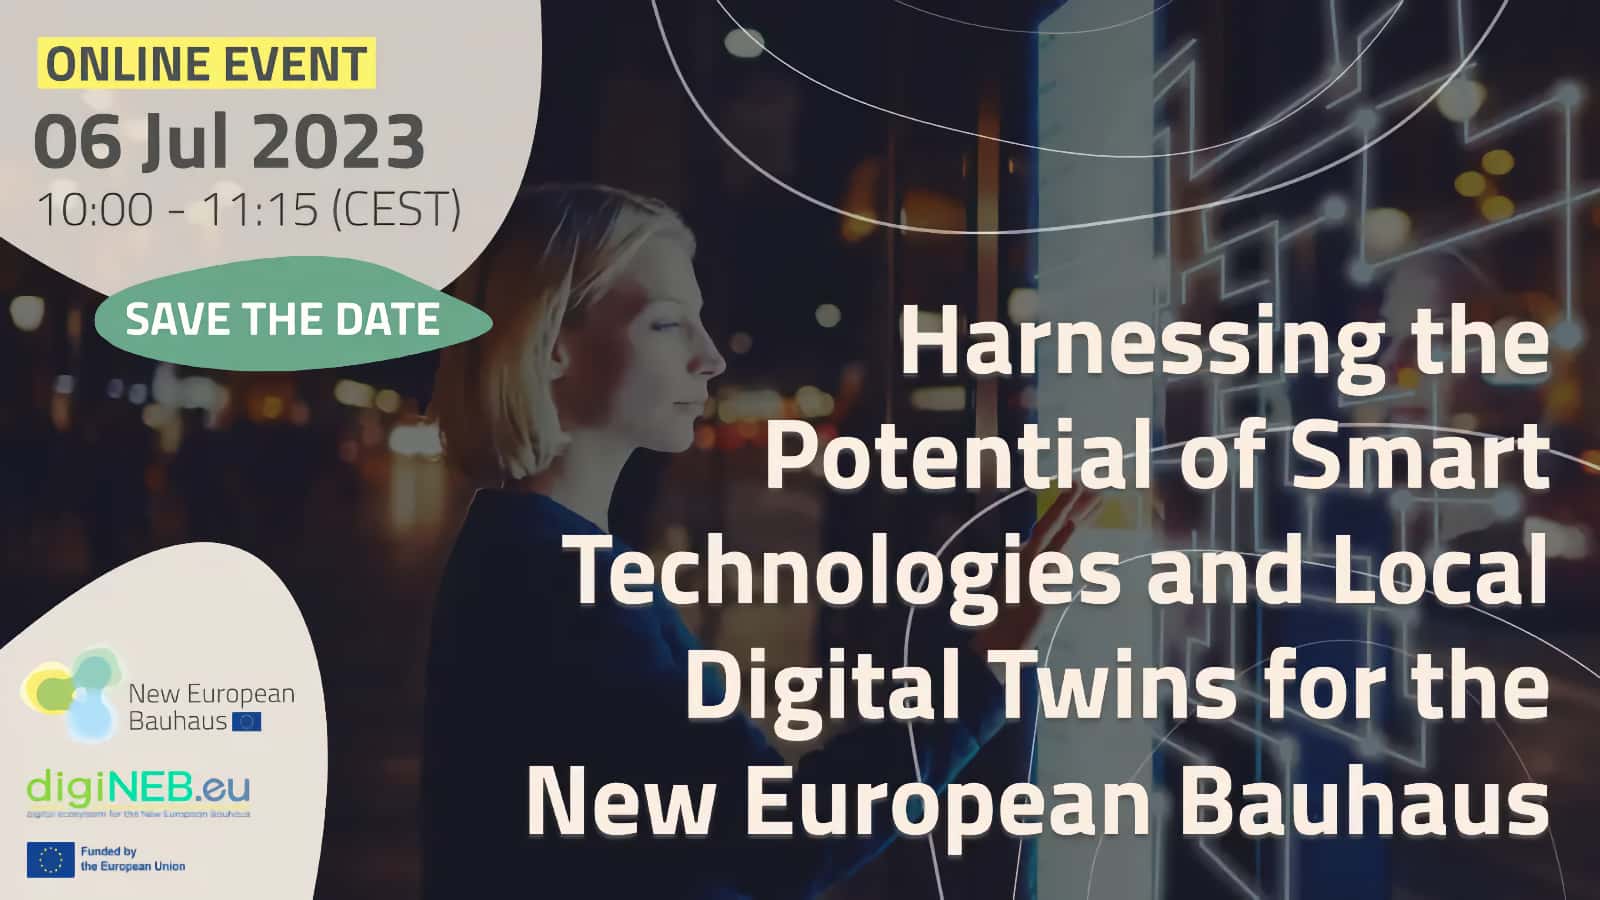 Harnessing the Potential of Smart Technologies and Local Digital Twins for the New European Bauhaus